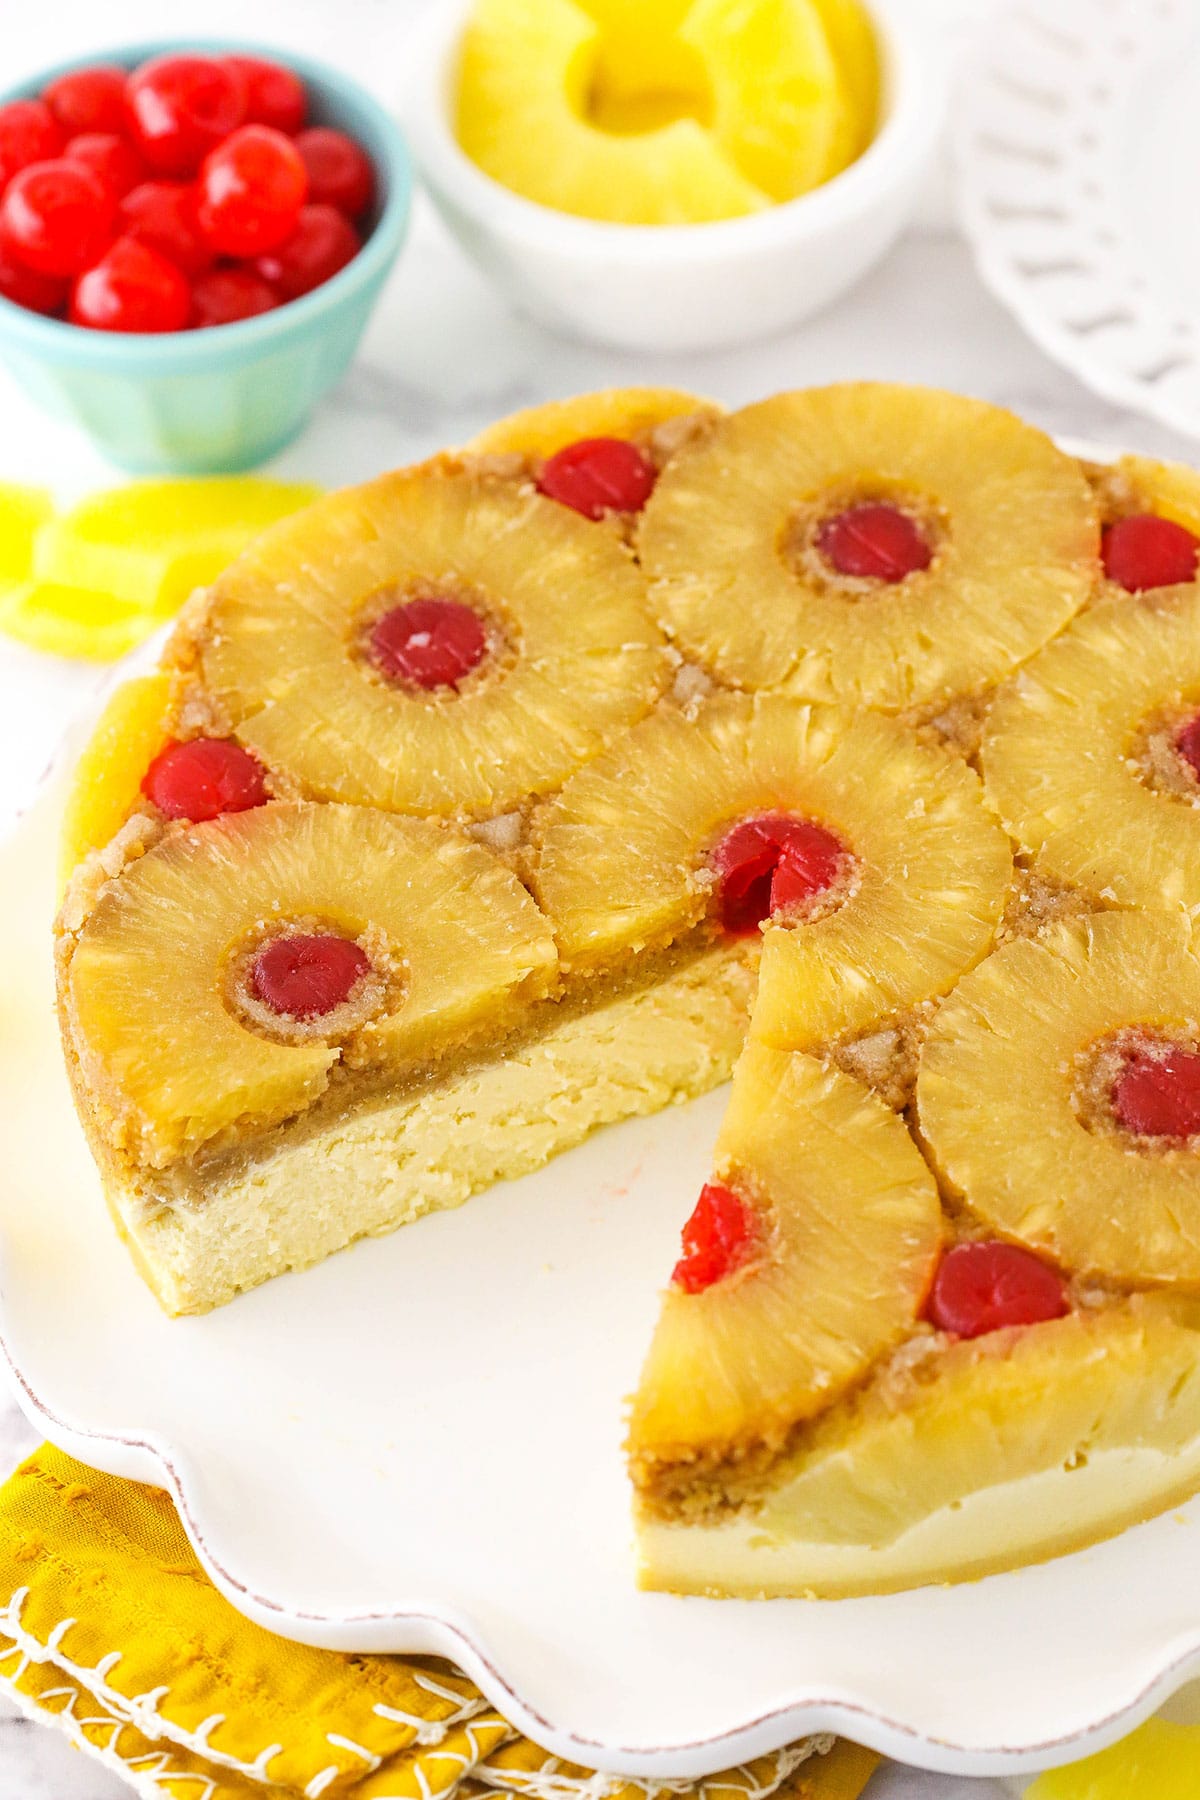 A cheesecake with one slice cut out. Pineapple and cherries are on the table near the cake.